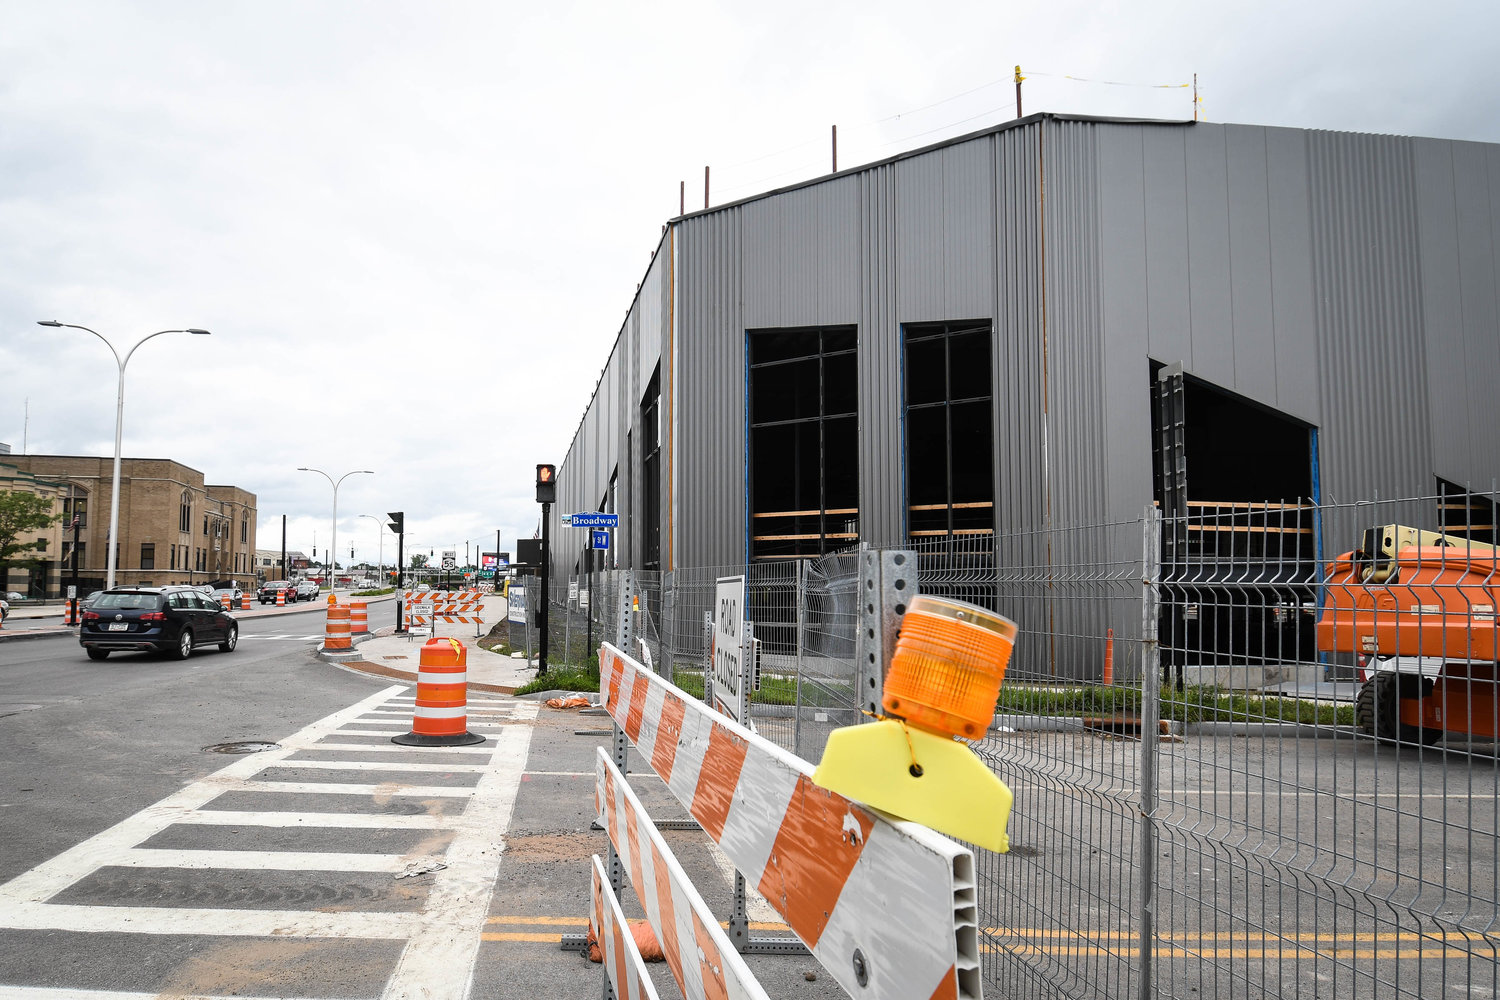 Construction continues on the Nexus Center in Utica.